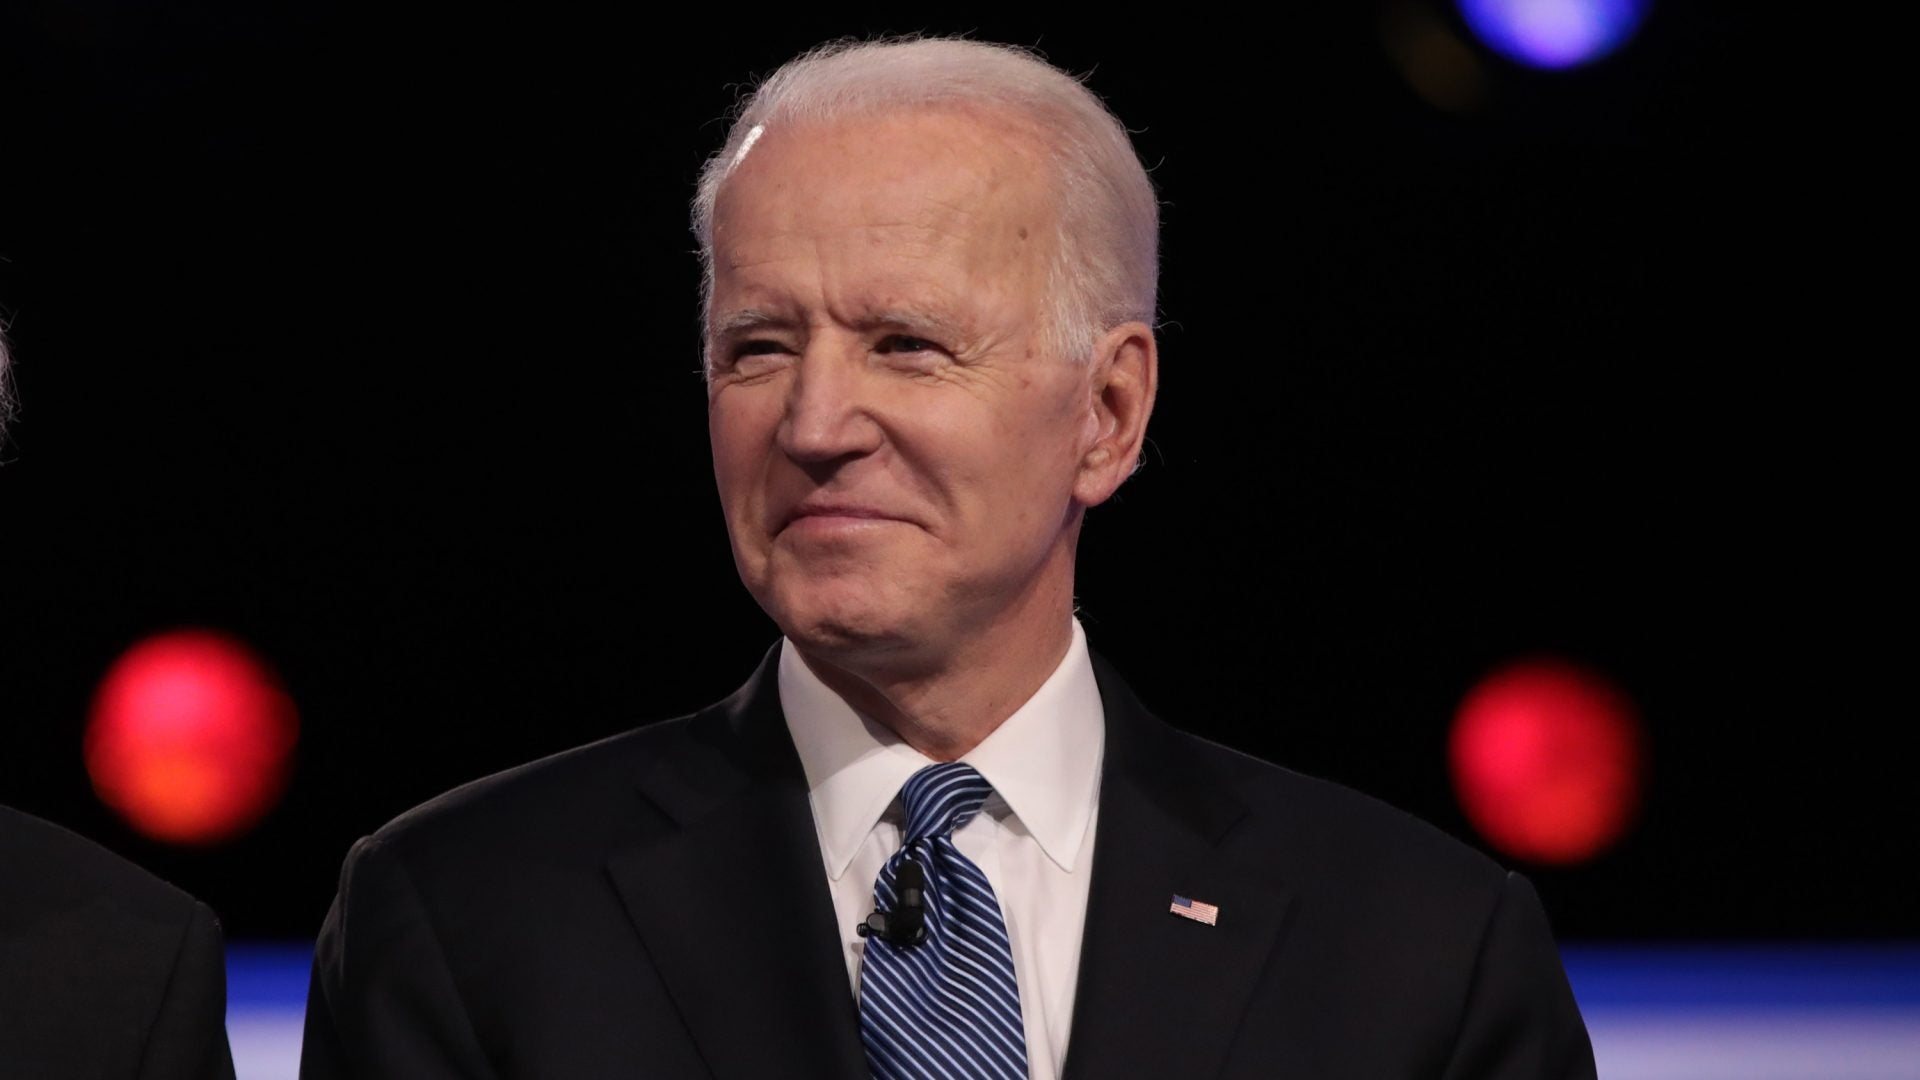 Biden: ‘If You Have A Problem Figuring Out Whether You’re For Me Or Trump, Then You Ain’t Black’